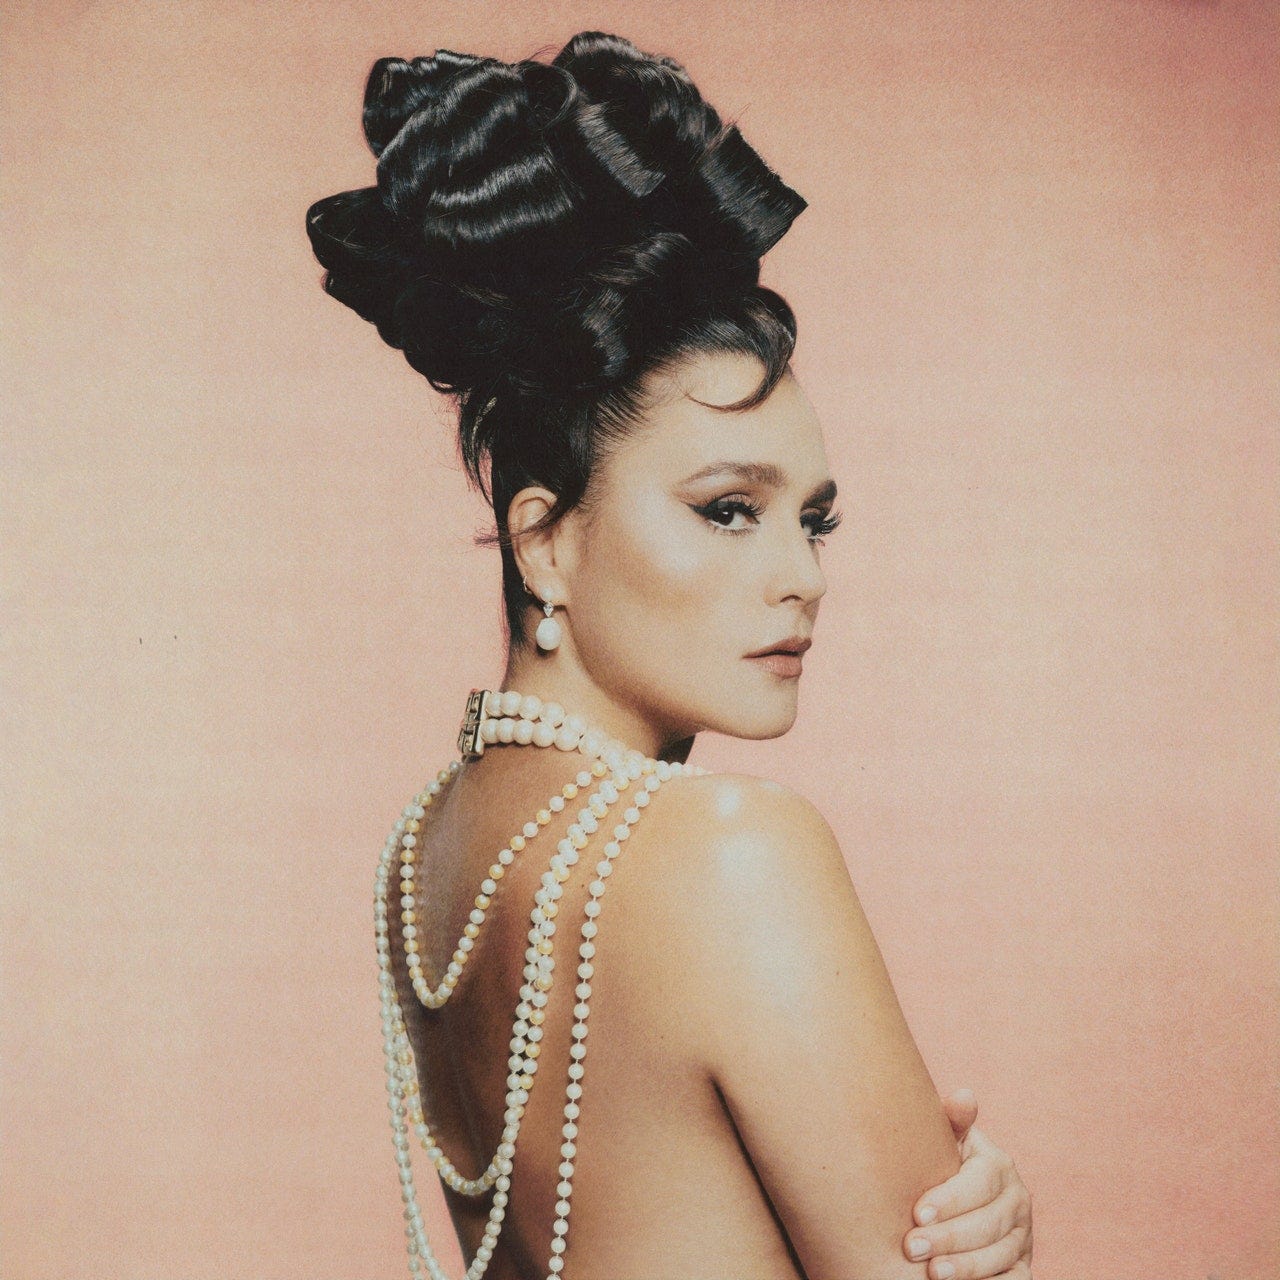 Jessie Ware stands with her back slightly to the camera wearing just a few strands of pearls that drape over her back and an elaborate updo.